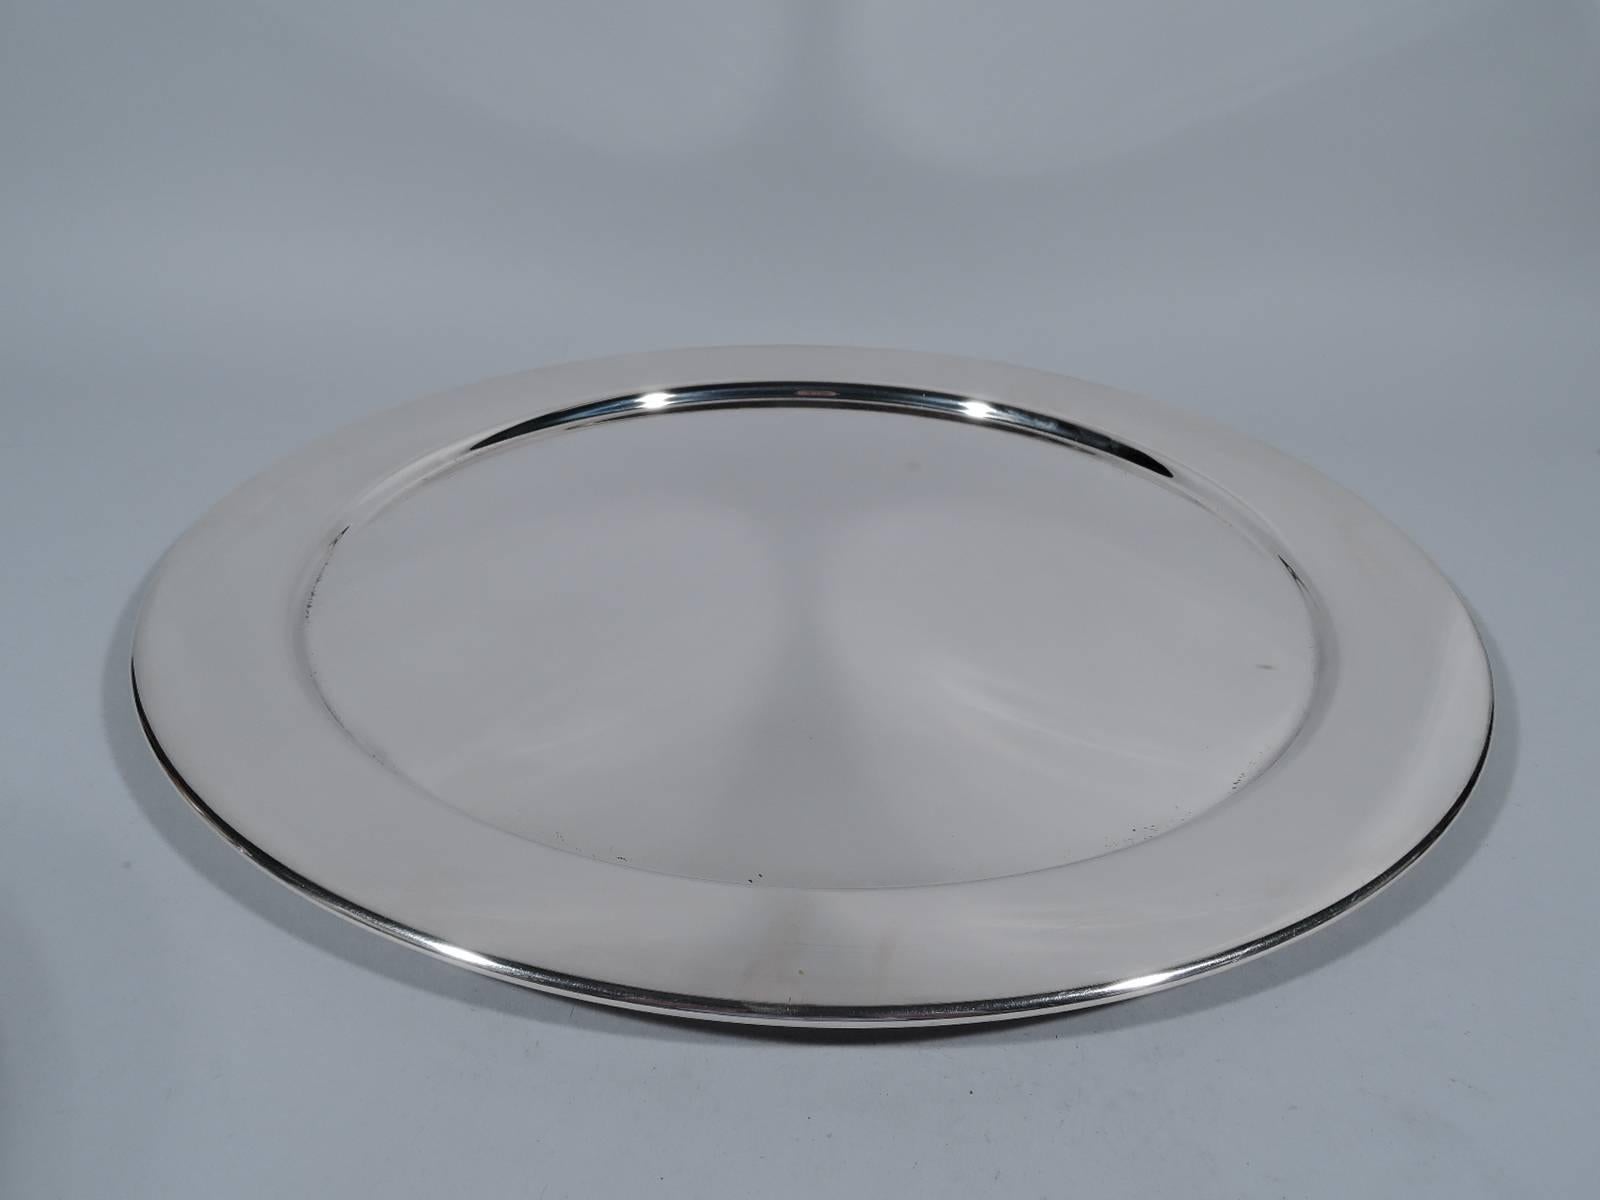 Sterling silver serving tray. Made by JC Boardman in Wallingford, Conn., circa 1950. Circular with deep well and flat rim. Hallmark includes no. 436. Heavy weight: 48 troy ounces.